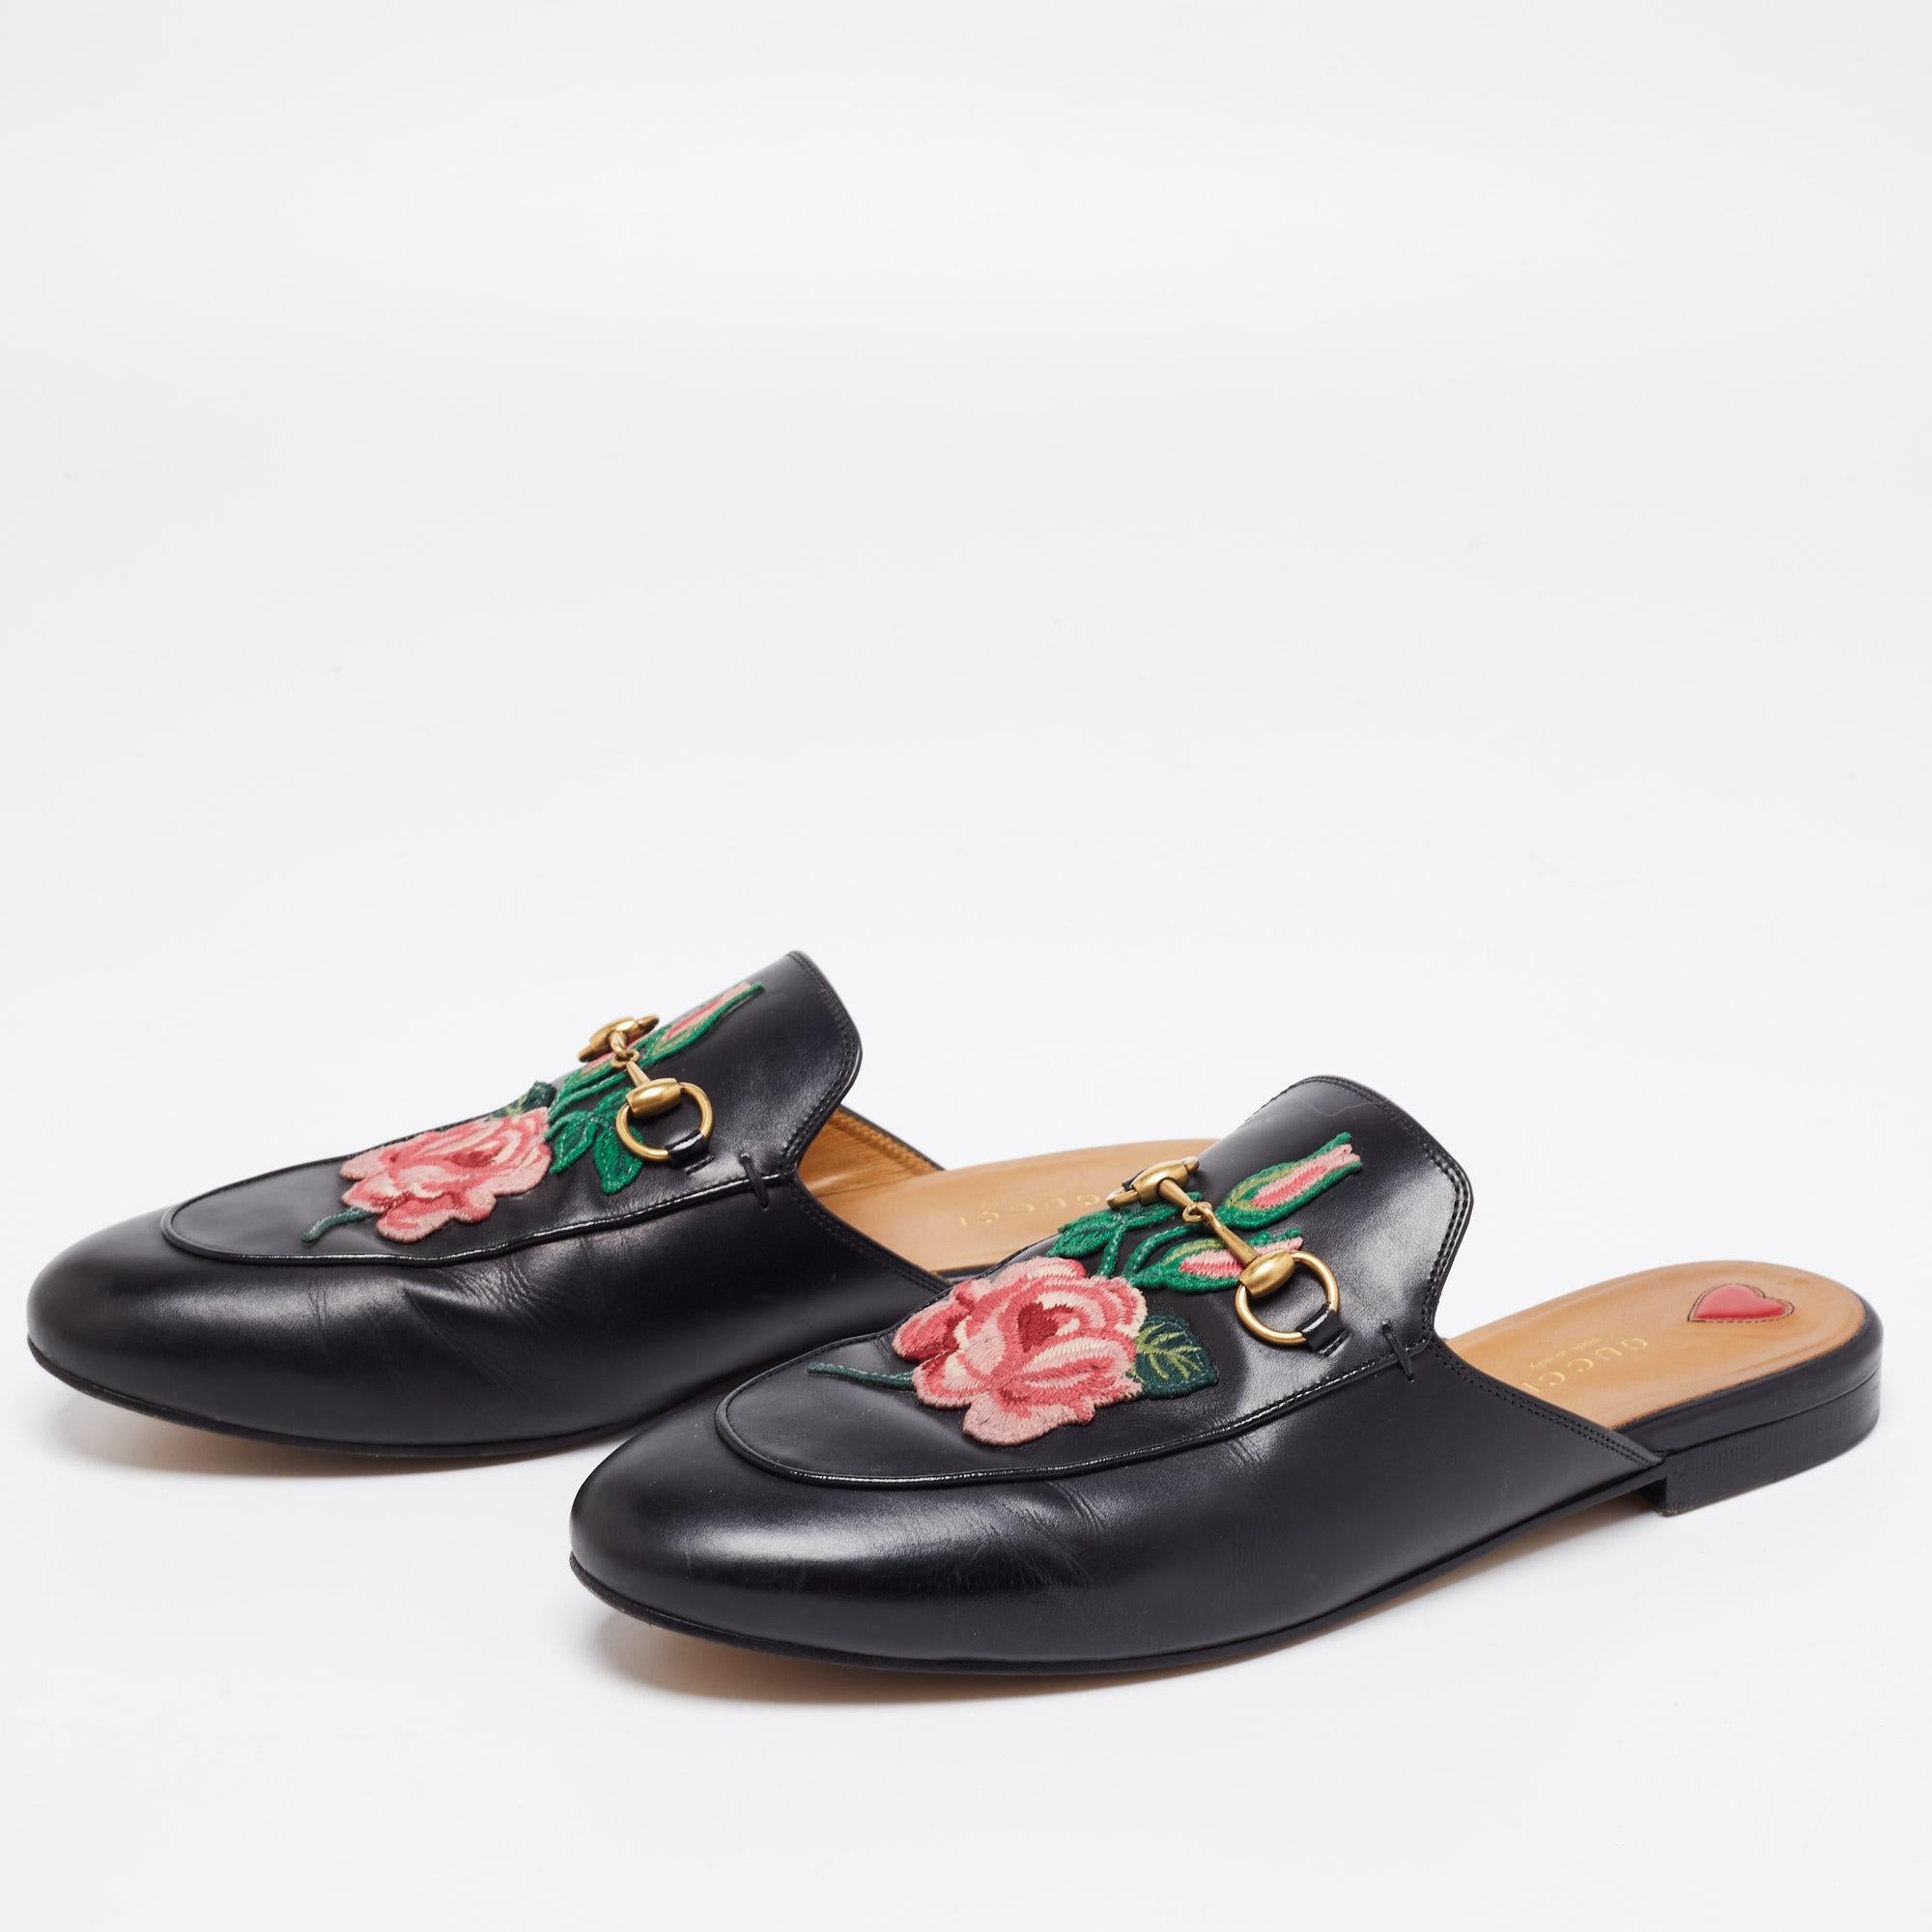 First introduced as part of Gucci's Fall Winter 2015 collection, the Princetown mules are an absolute favourite worldwide and have been worn by countless celebrities. These mules have been designed in black leather and detailed with embroidered rose